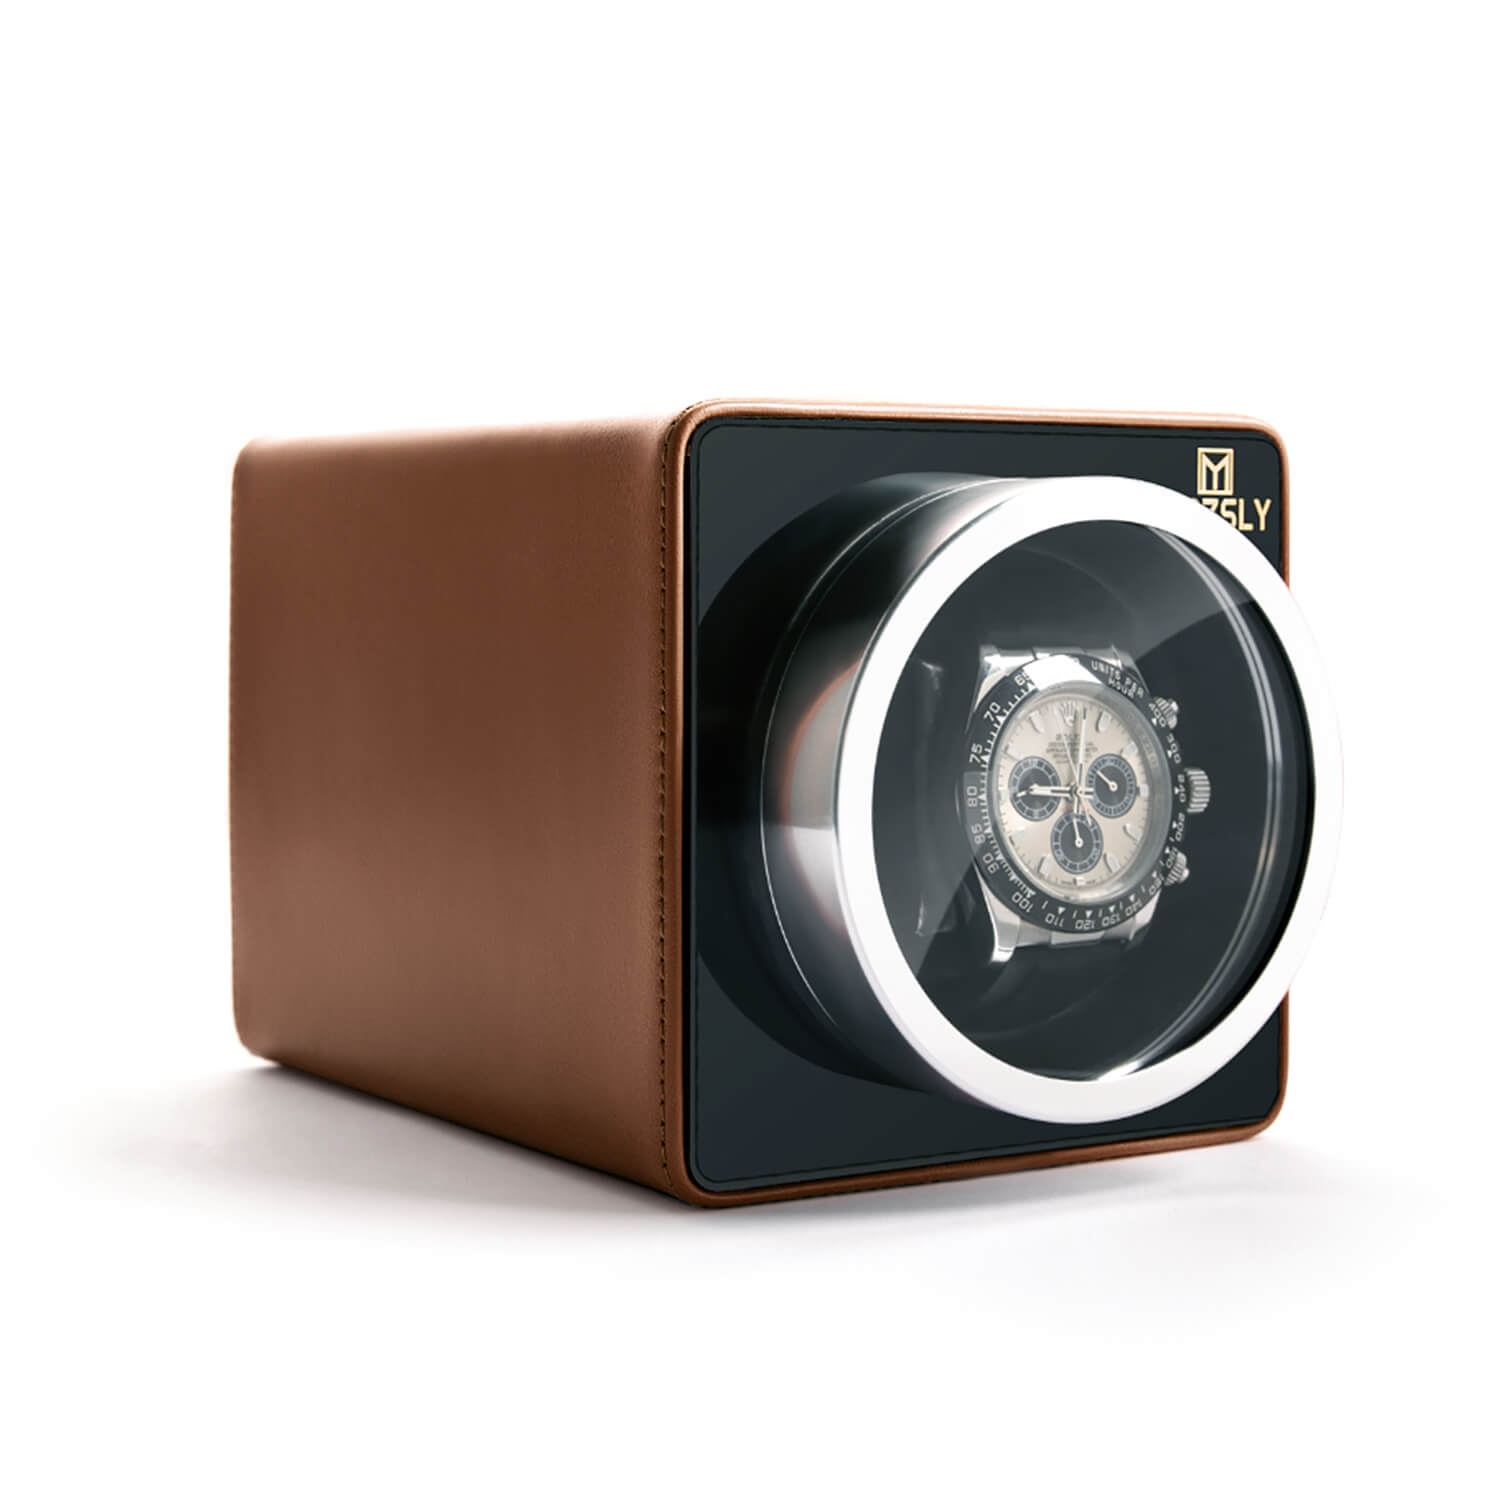 MOZSLY® Single Watch Winder - Brown Leather